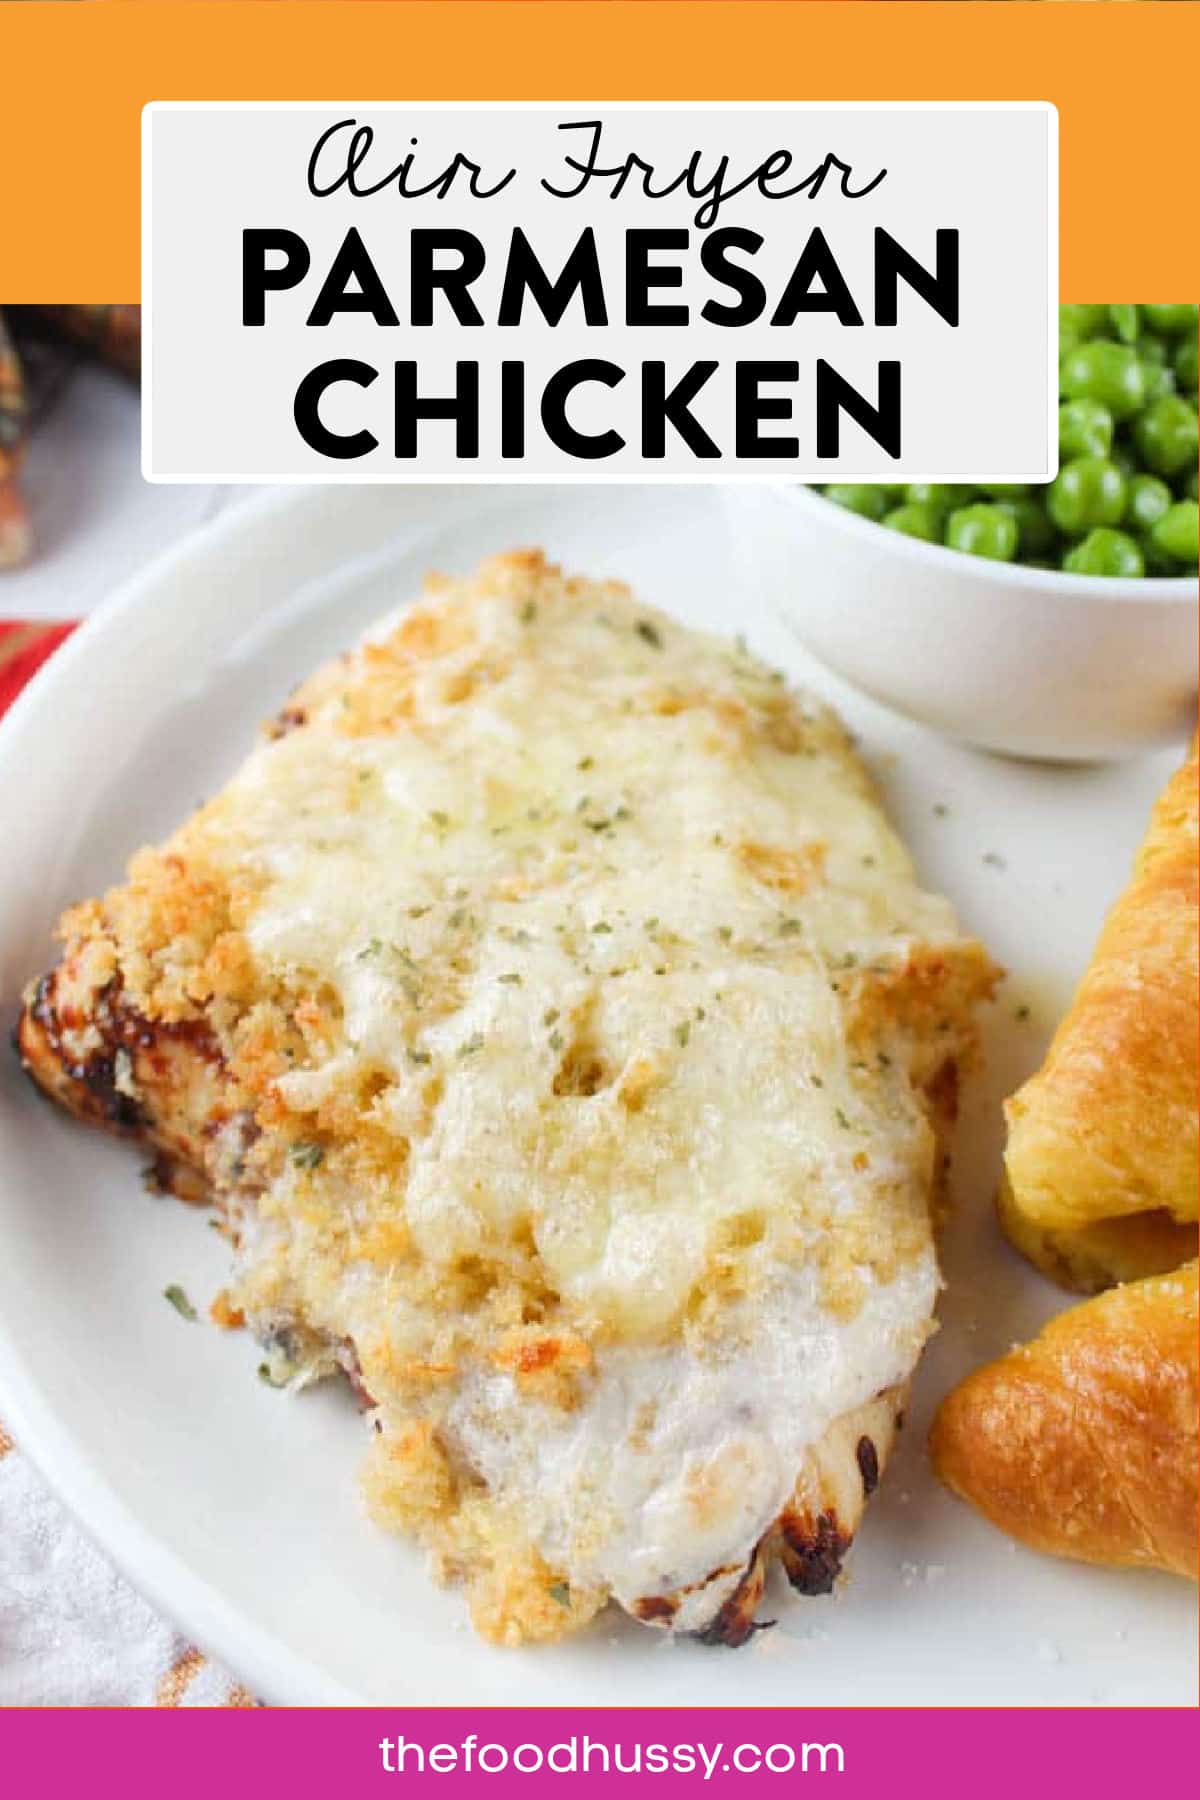 Making Parmesan Crusted Chicken in the Air Fryer is so simple - plus dinner is ready in less than 20 minutes! Ordinary chicken becomes irresistible when it's topped with a creamy, crunchy Parmesan crust. Plain chicken be gone! via @foodhussy